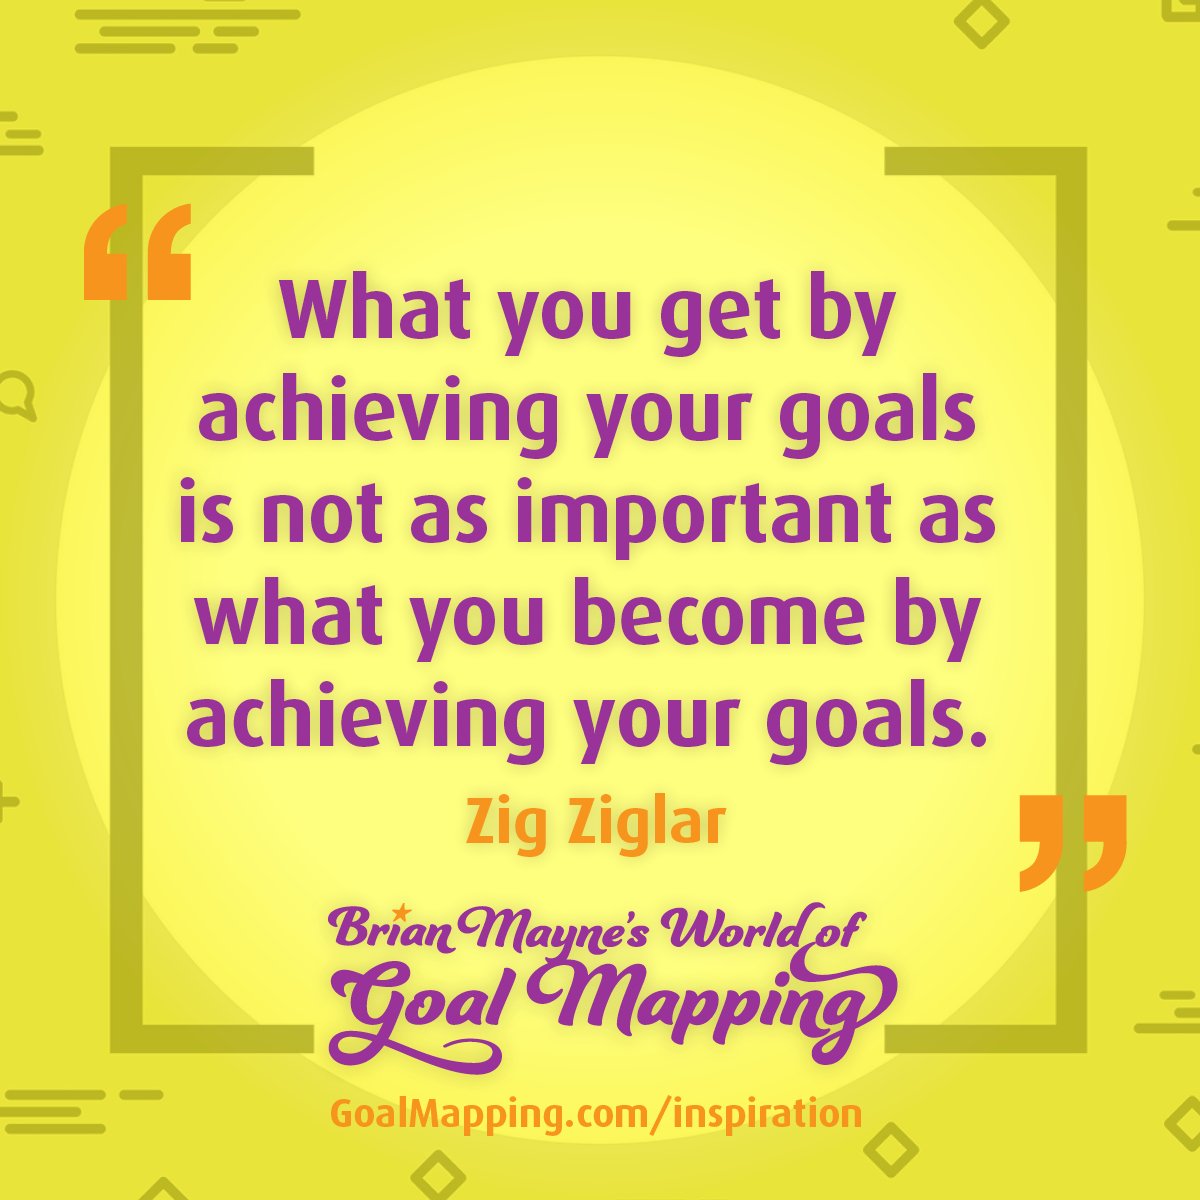 "What you get by achieving your goals is not as important as what you become by achieving your goals." Zig Ziglar